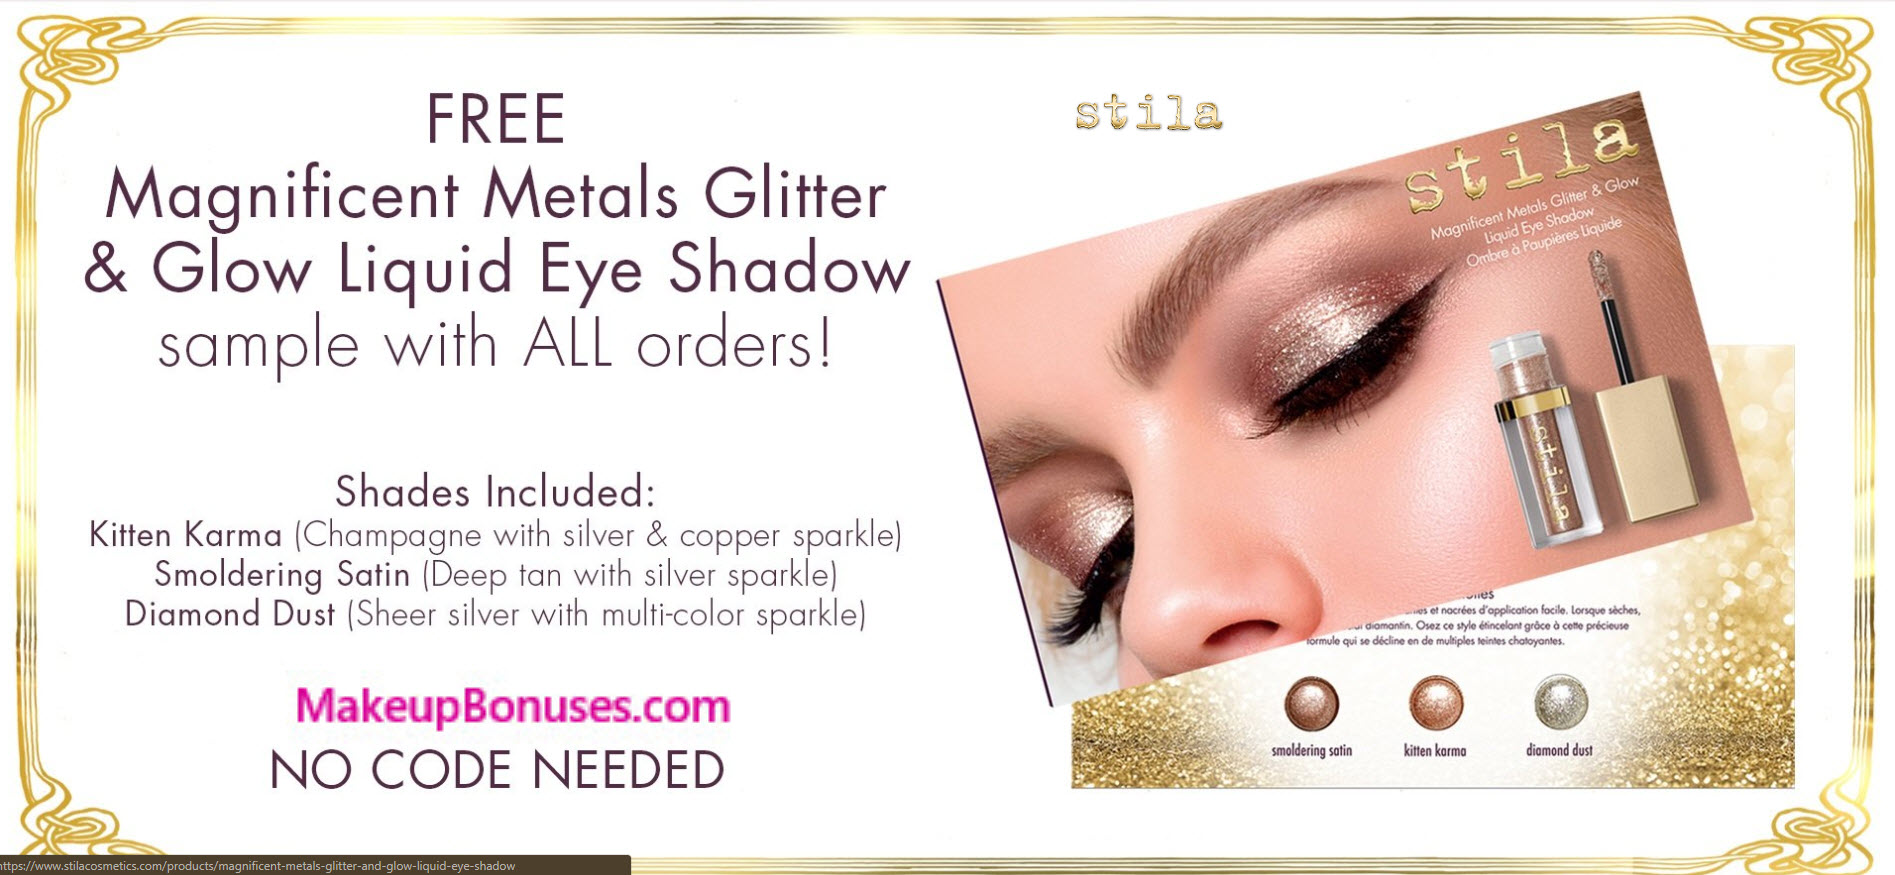 Receive a free 3- pc gift with your $50 Stila purchase